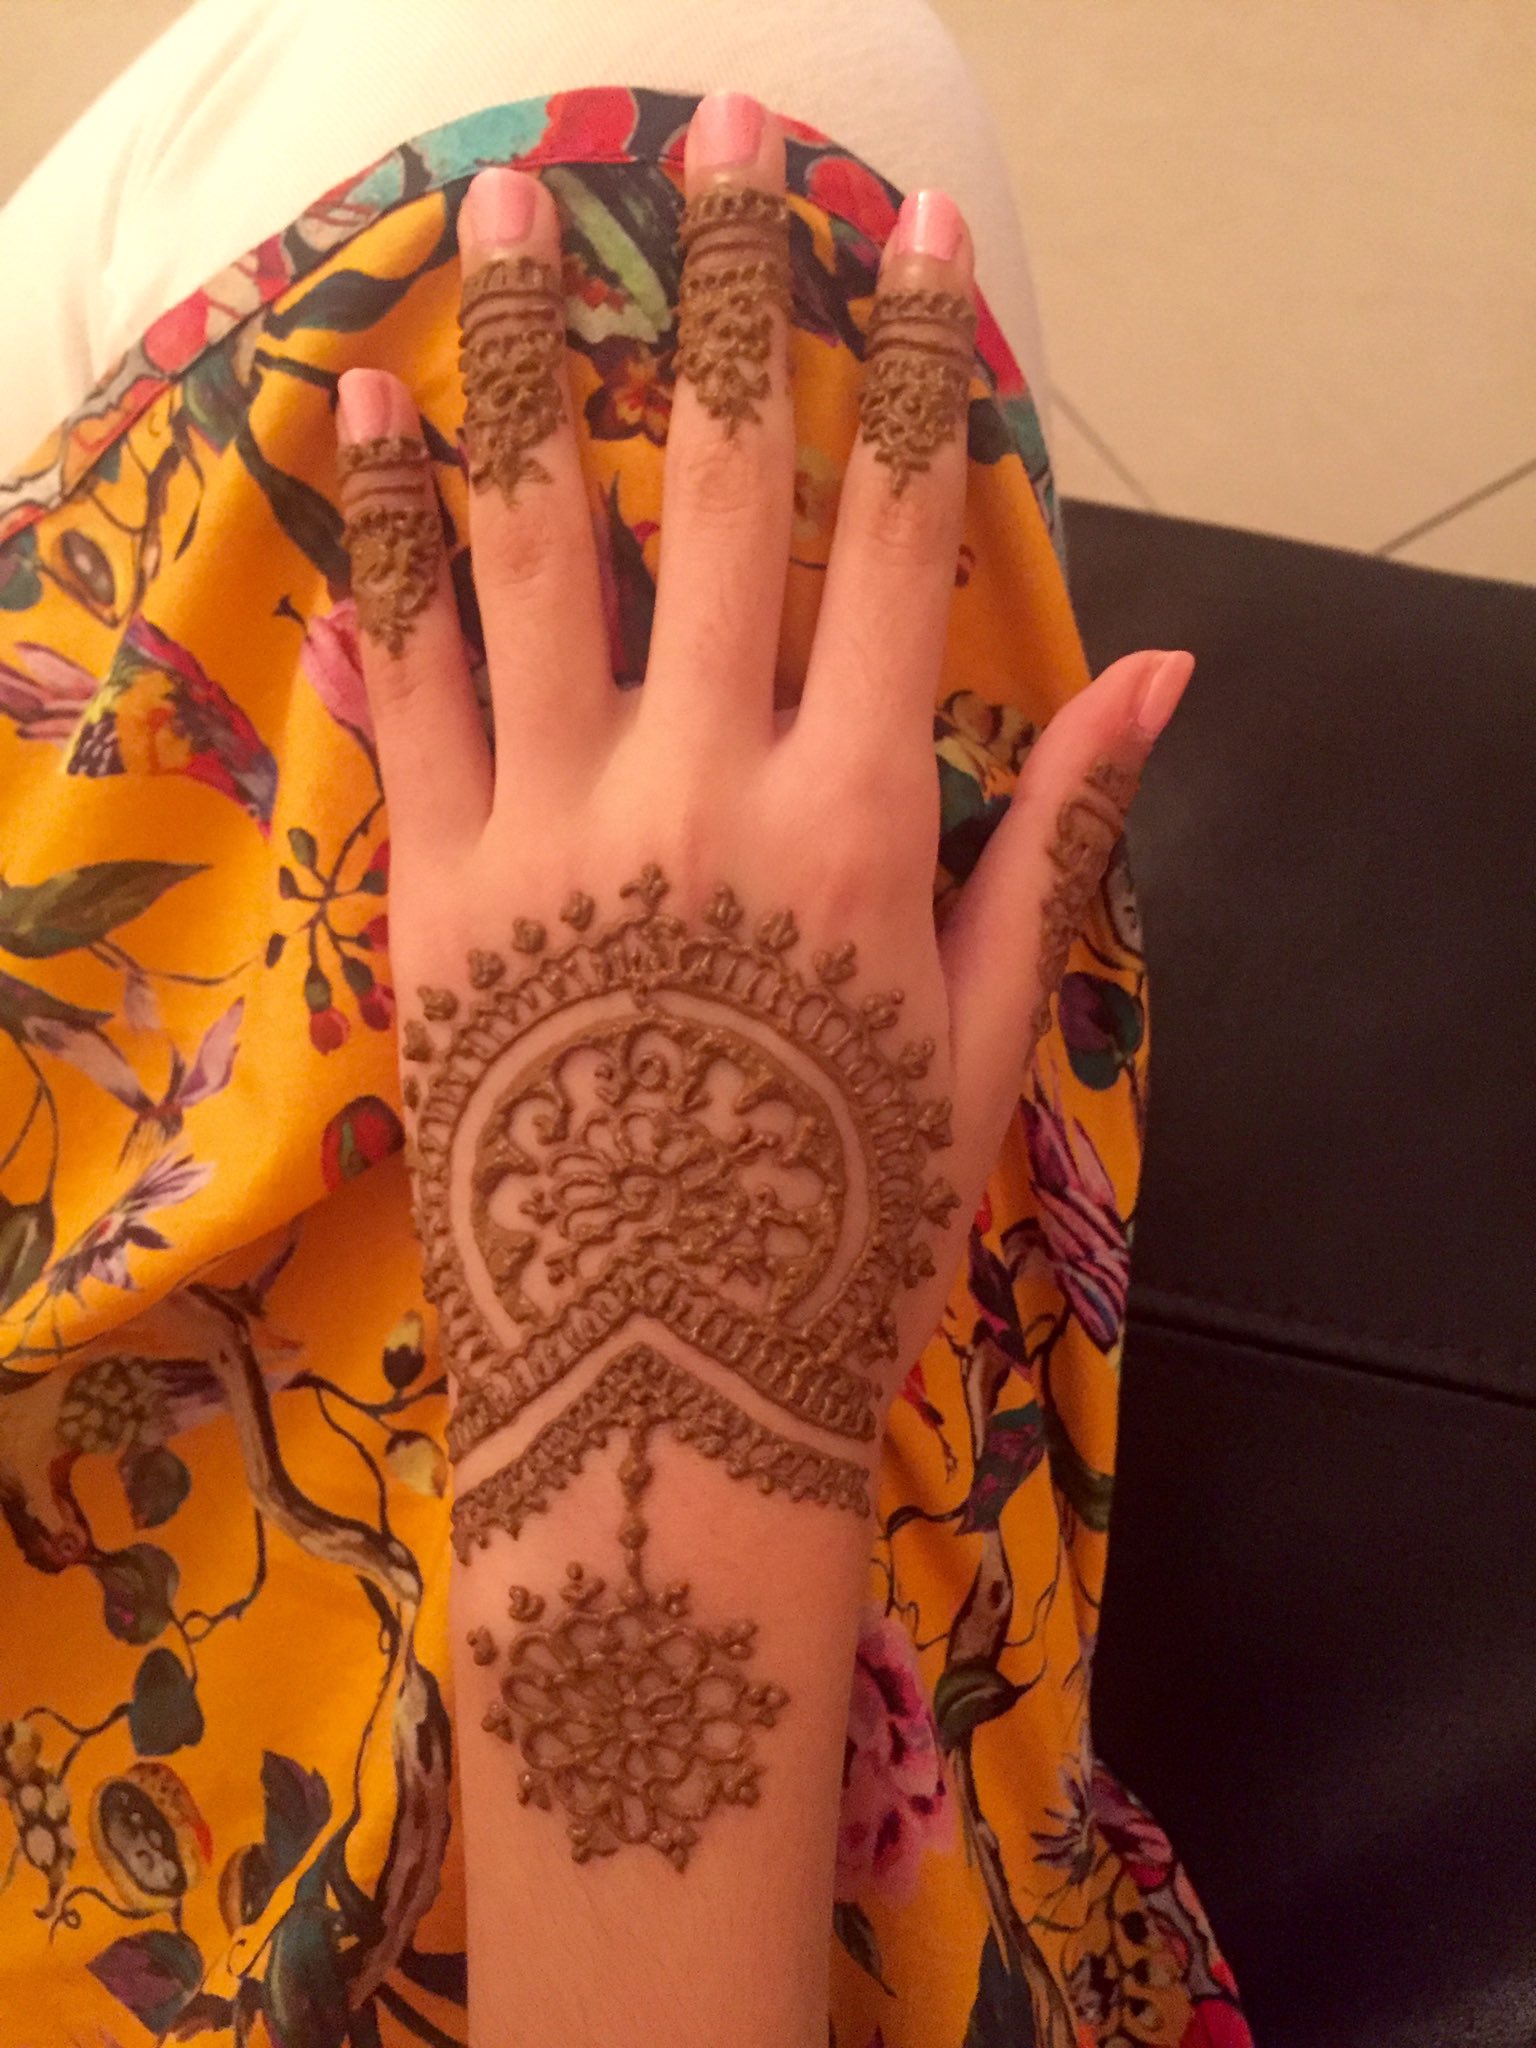 Simple Tips That Can Make Your 'Mehendi' Dark And Long-Lasting For Karwa  Chauth 2021